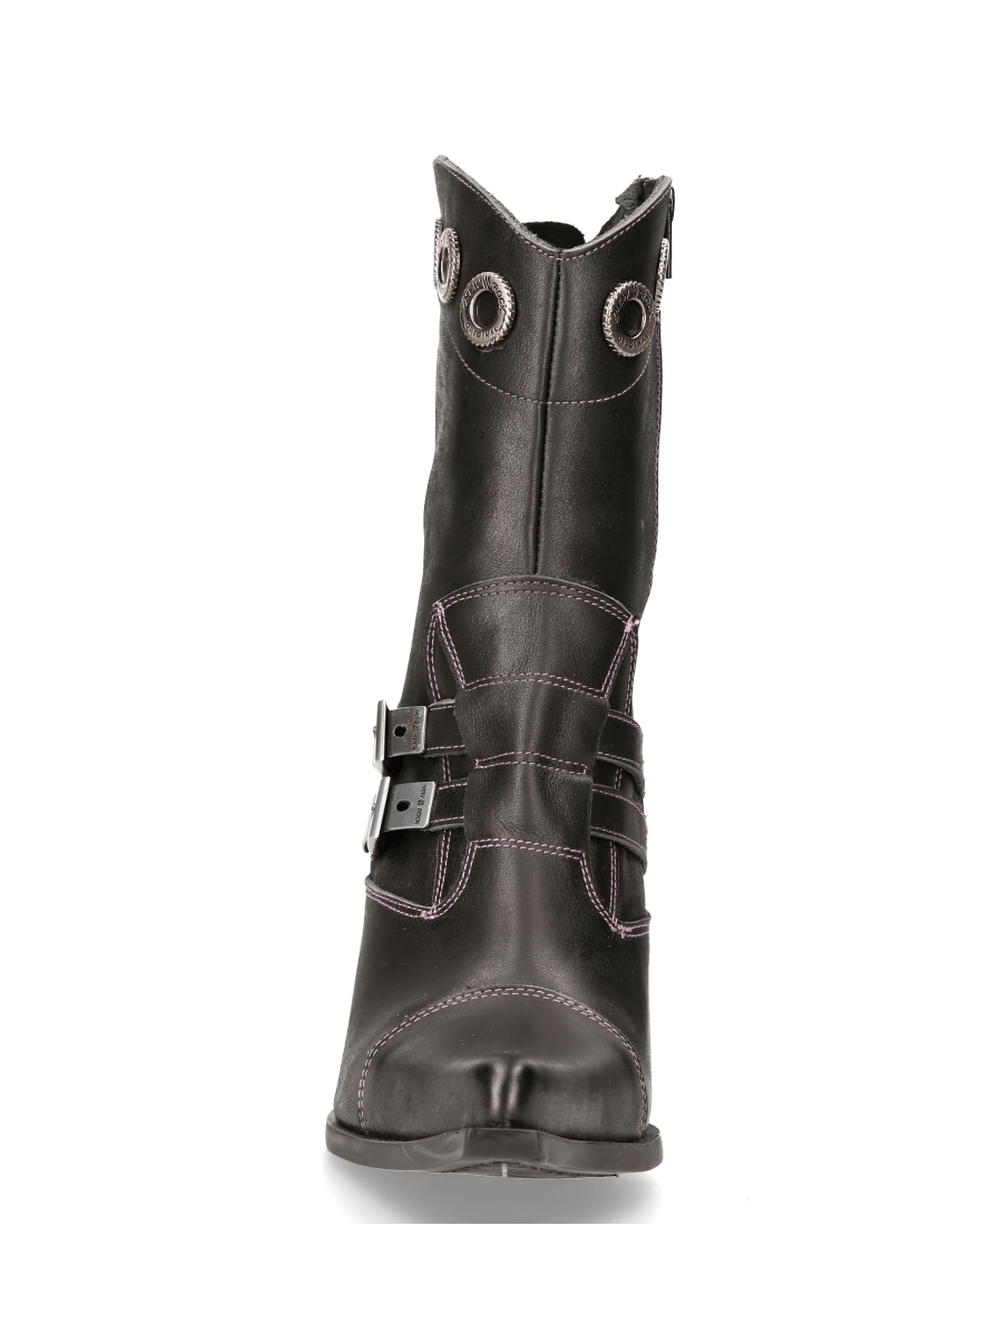 NEW ROCK Embellished Black Ankle Boots with Silver Buckle